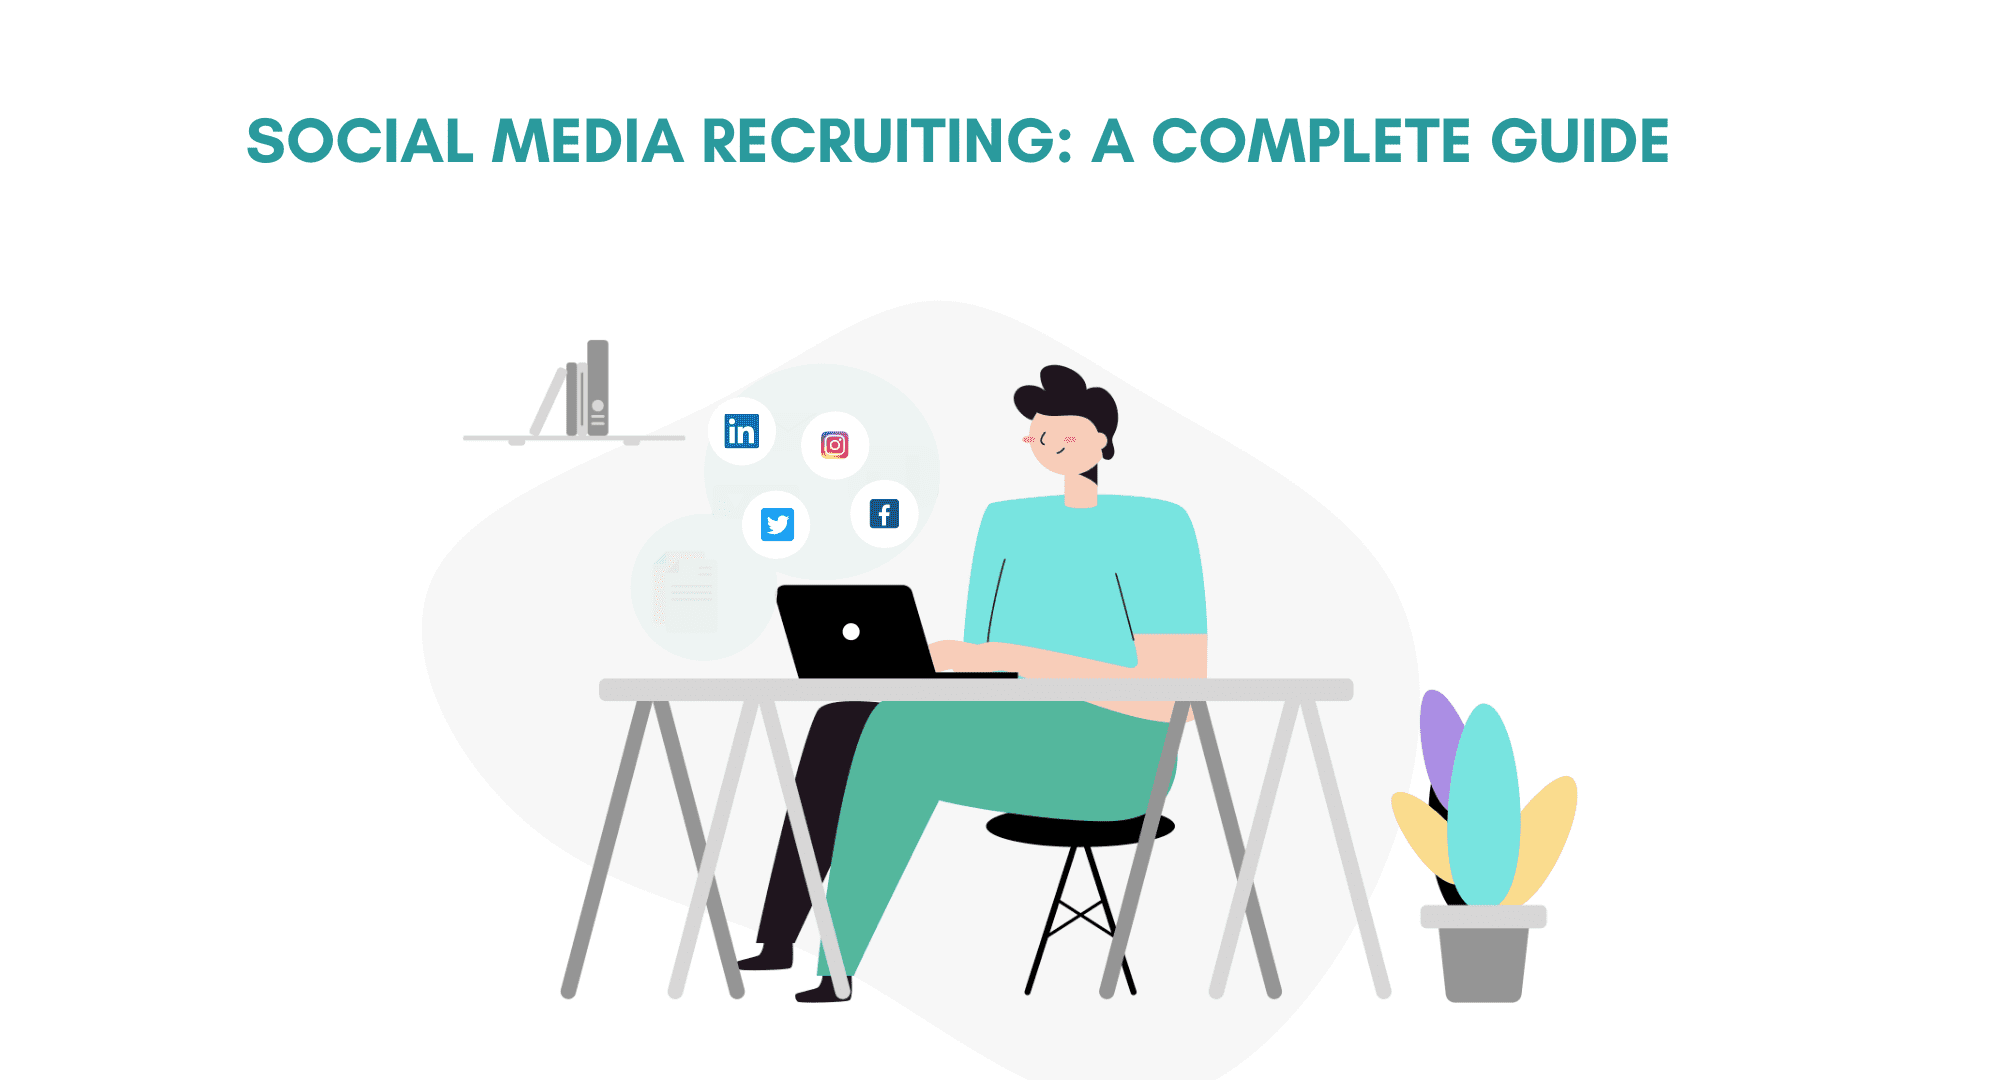 Scial Media Recruiting: A complete Guide. A Guide to social media recruiting. How to recruit using social media. Social media recruiting guide. Social media recruiting in 2020.